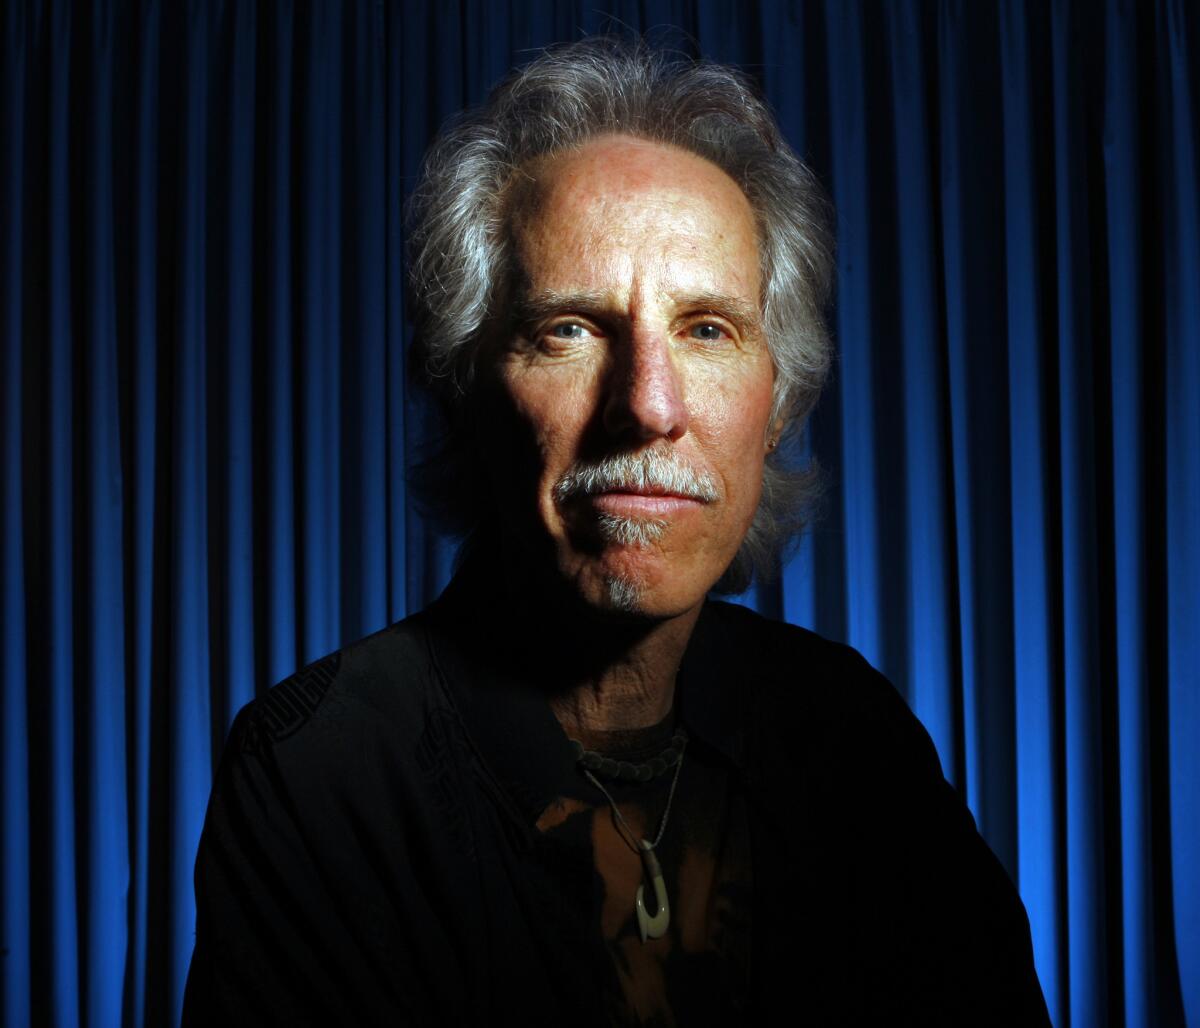 John Densmore, shown in 2010, will sign copies of his 2013 book "The Doors Unhinged: Jim Morrison's Legacy Goes on Trial" on Saturday in Hollywood.